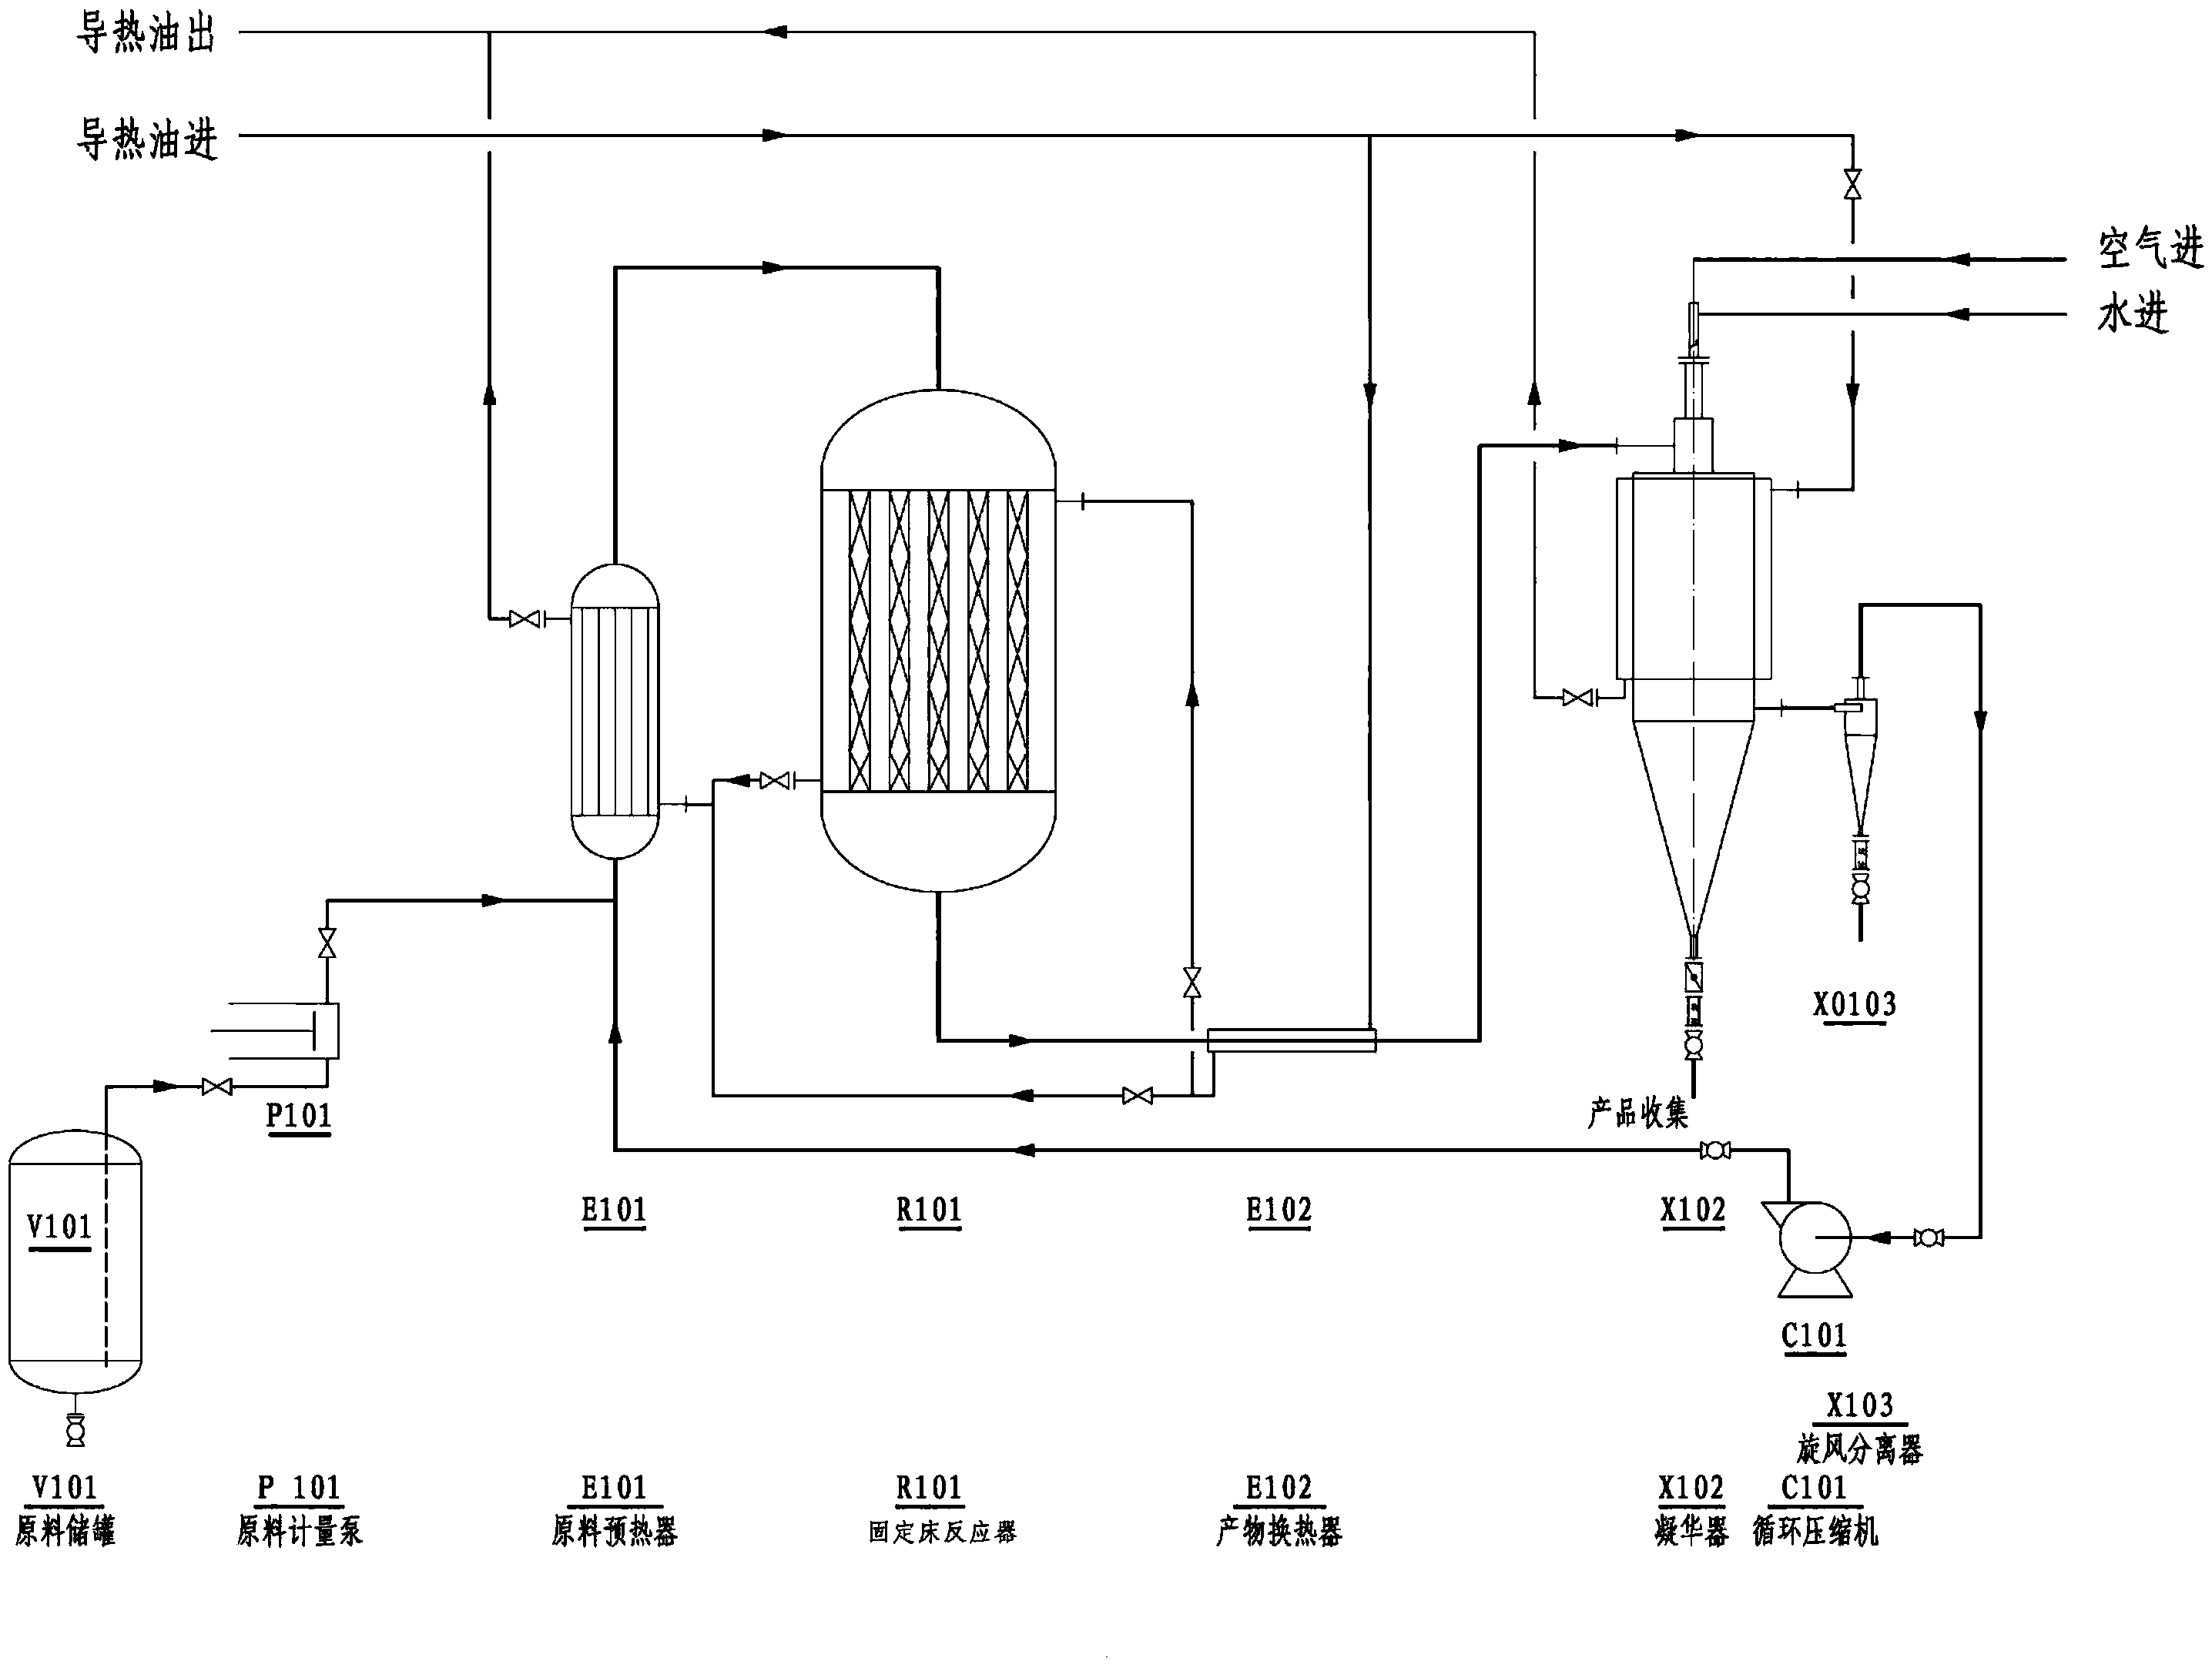 Process and device for one-step air catalytic oxidation synthesis of picolinic acid type compounds